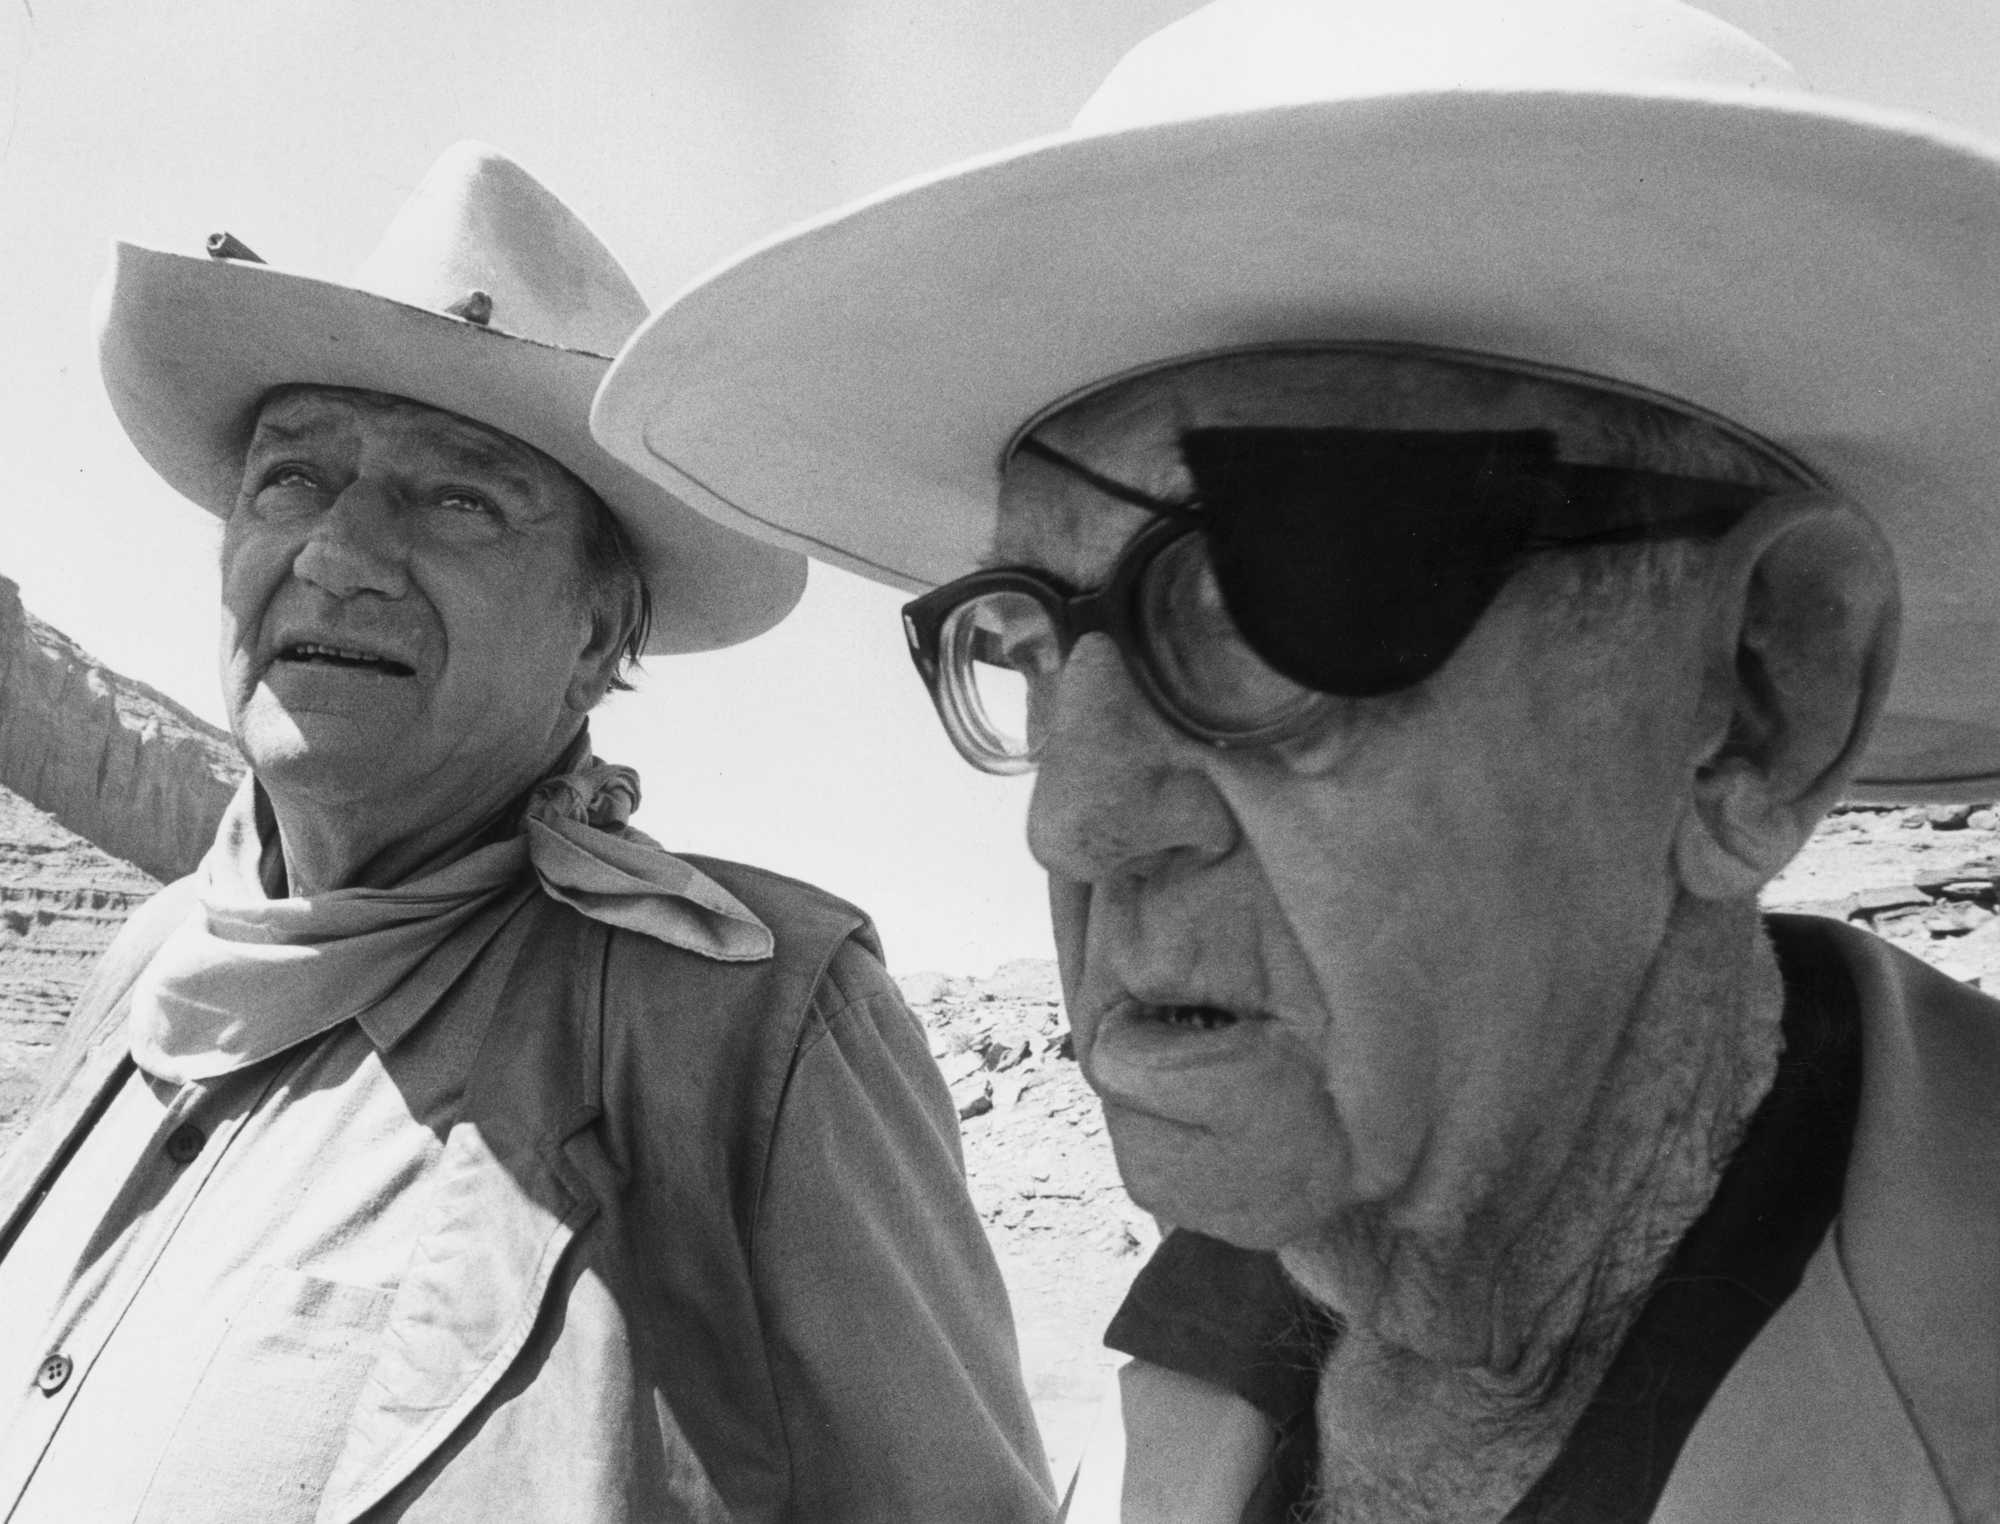 John Wayne and John Ford standing next to each other wearing cowboy hats, looking ahead.